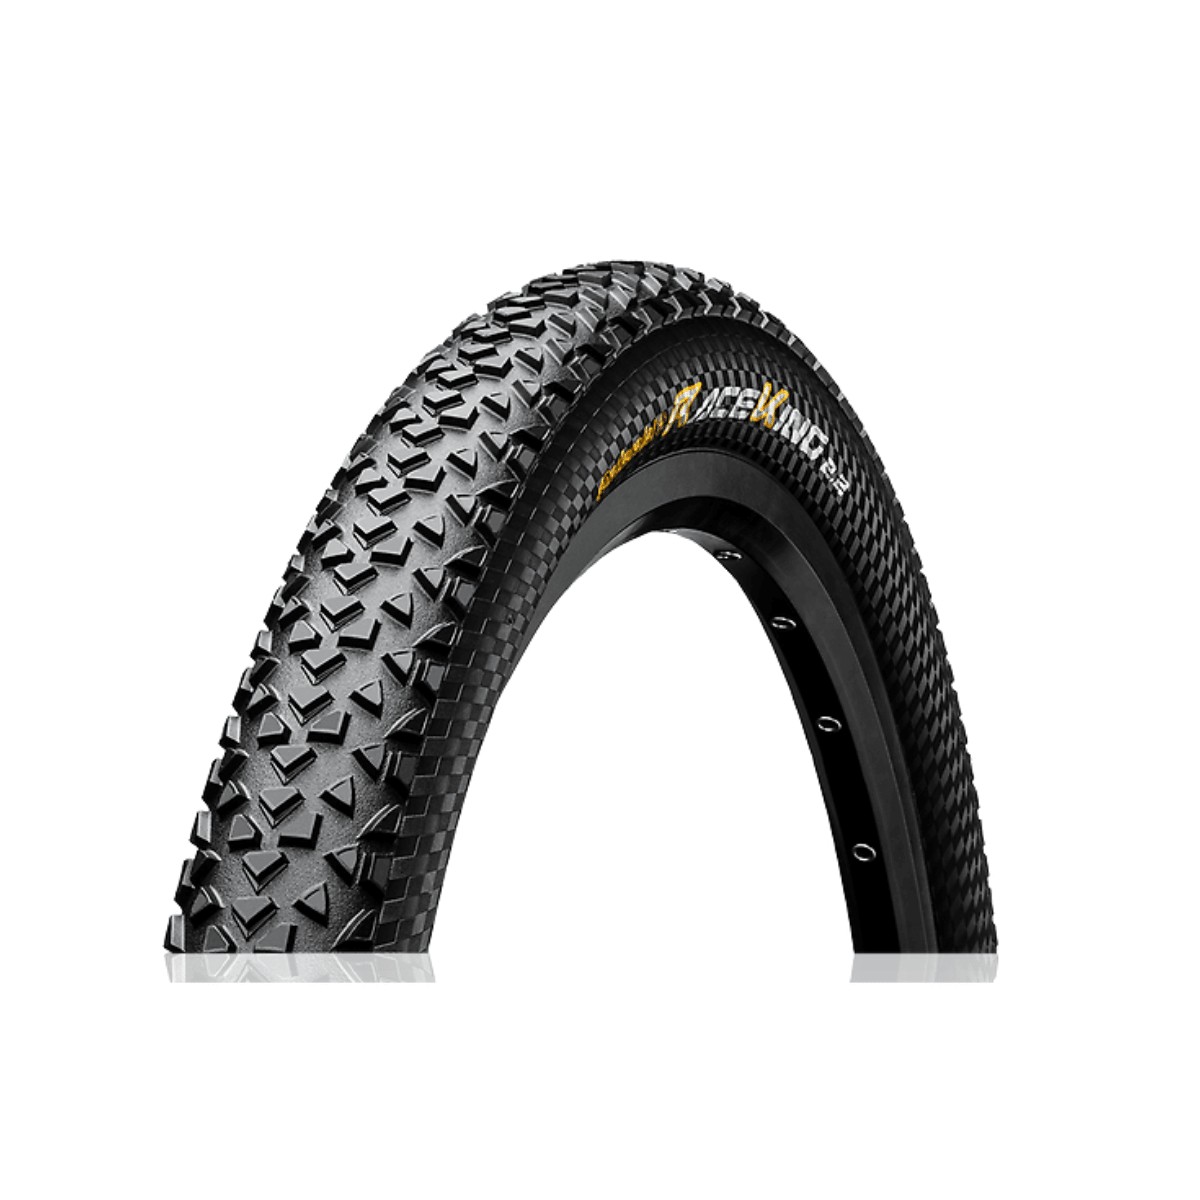 Continental Race King Protection 26, 27'5 oder 29 x 2.20 Tubeless Ready Reifen, Größe 27.5"x2.20